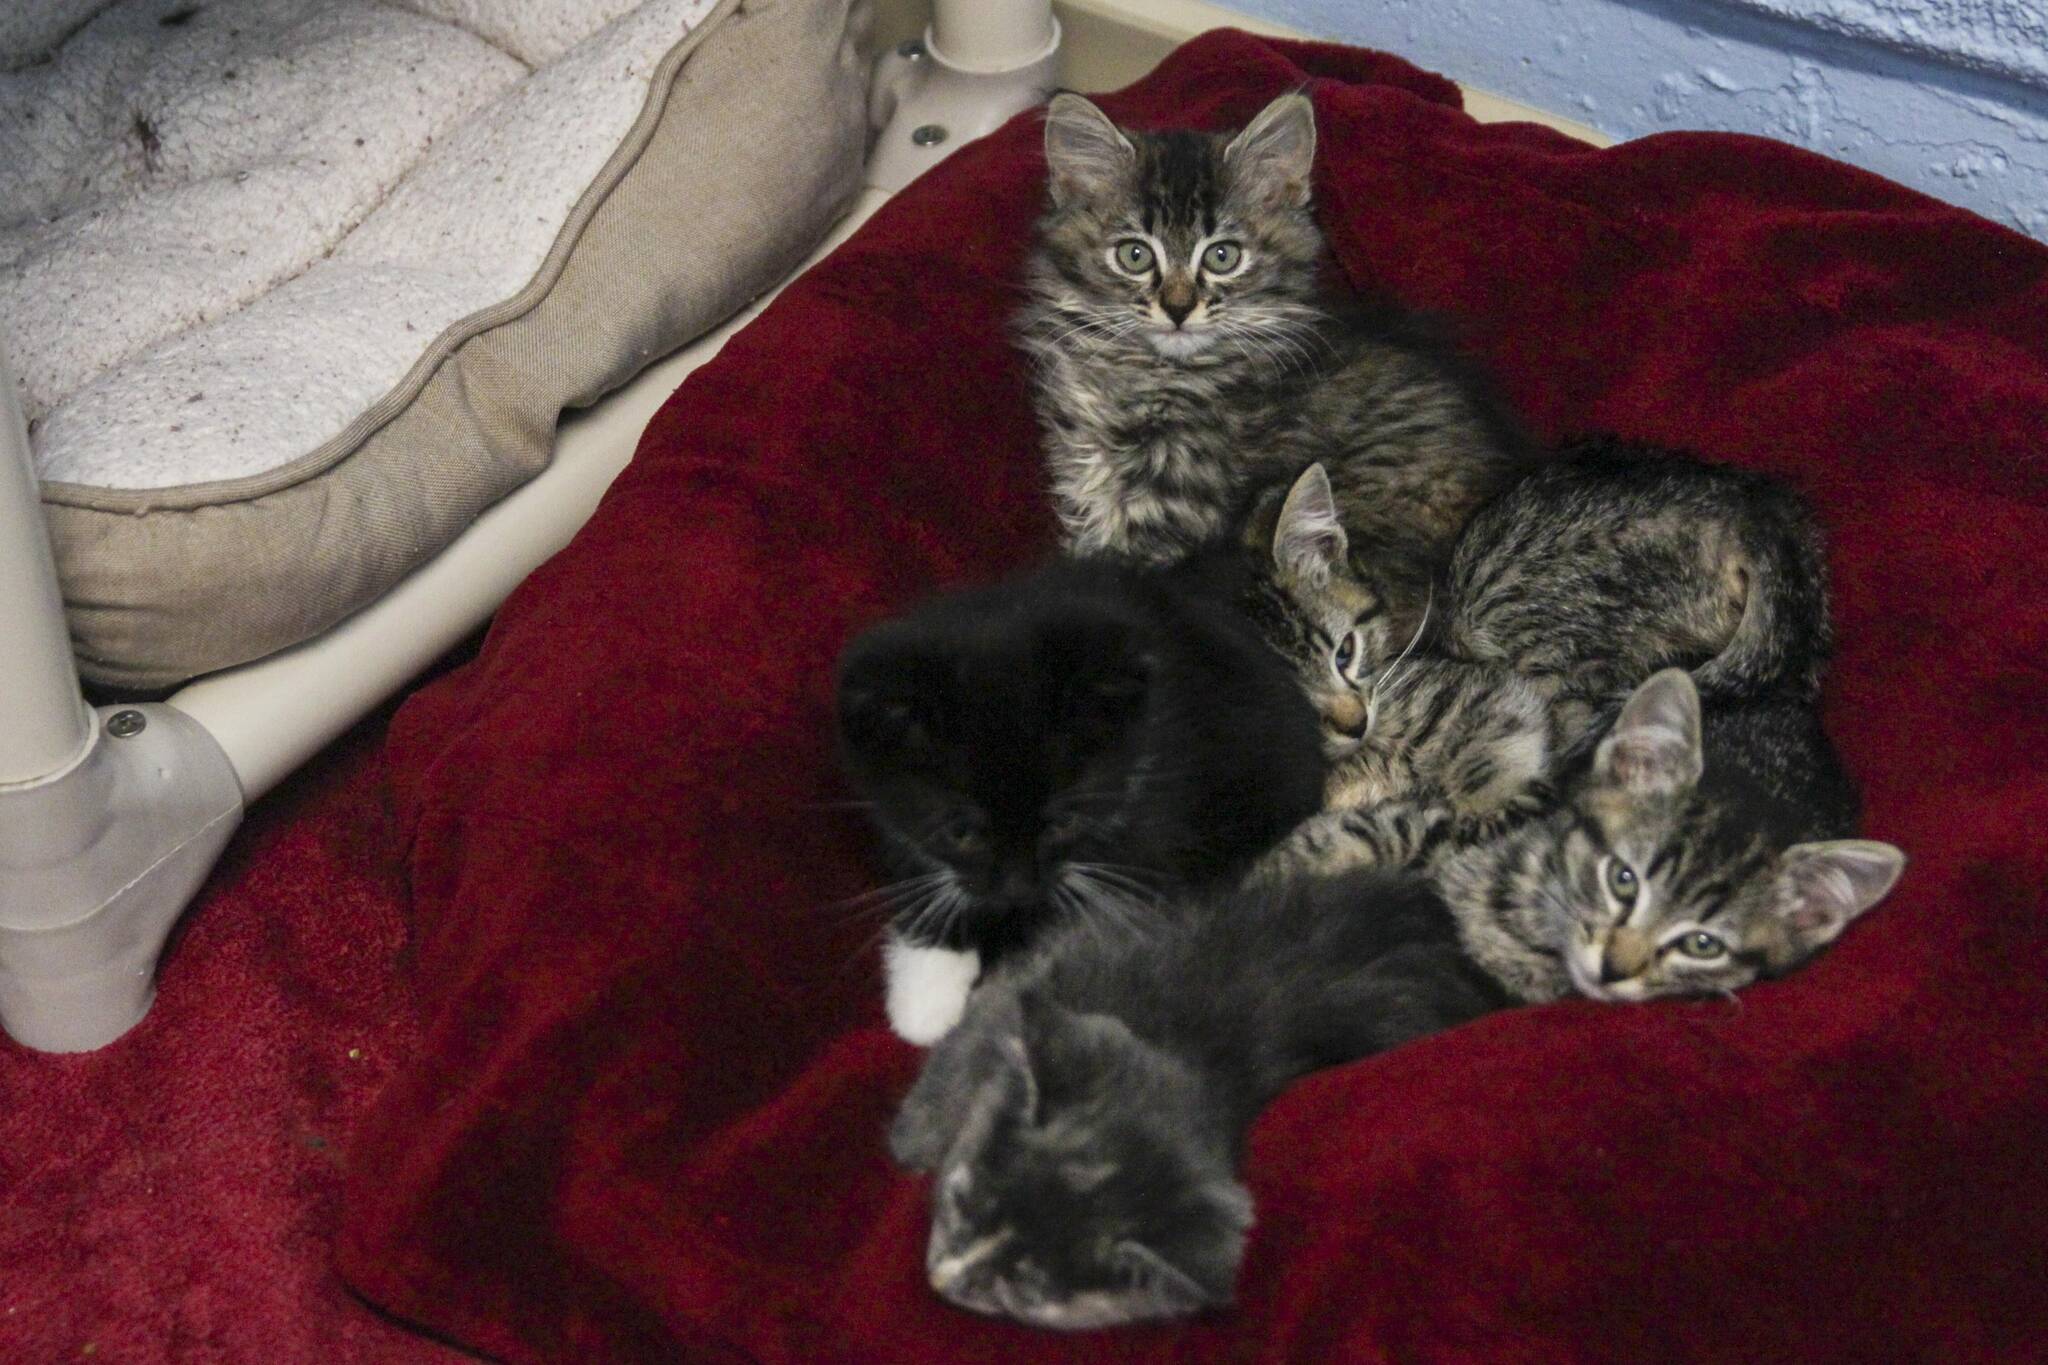 A cuddle-puddle of kittens nestles at Juneau Animal Rescue, which recently received a large legacy gift from a Juneau resident. (Michael S. Lockett / Juneau Empire)